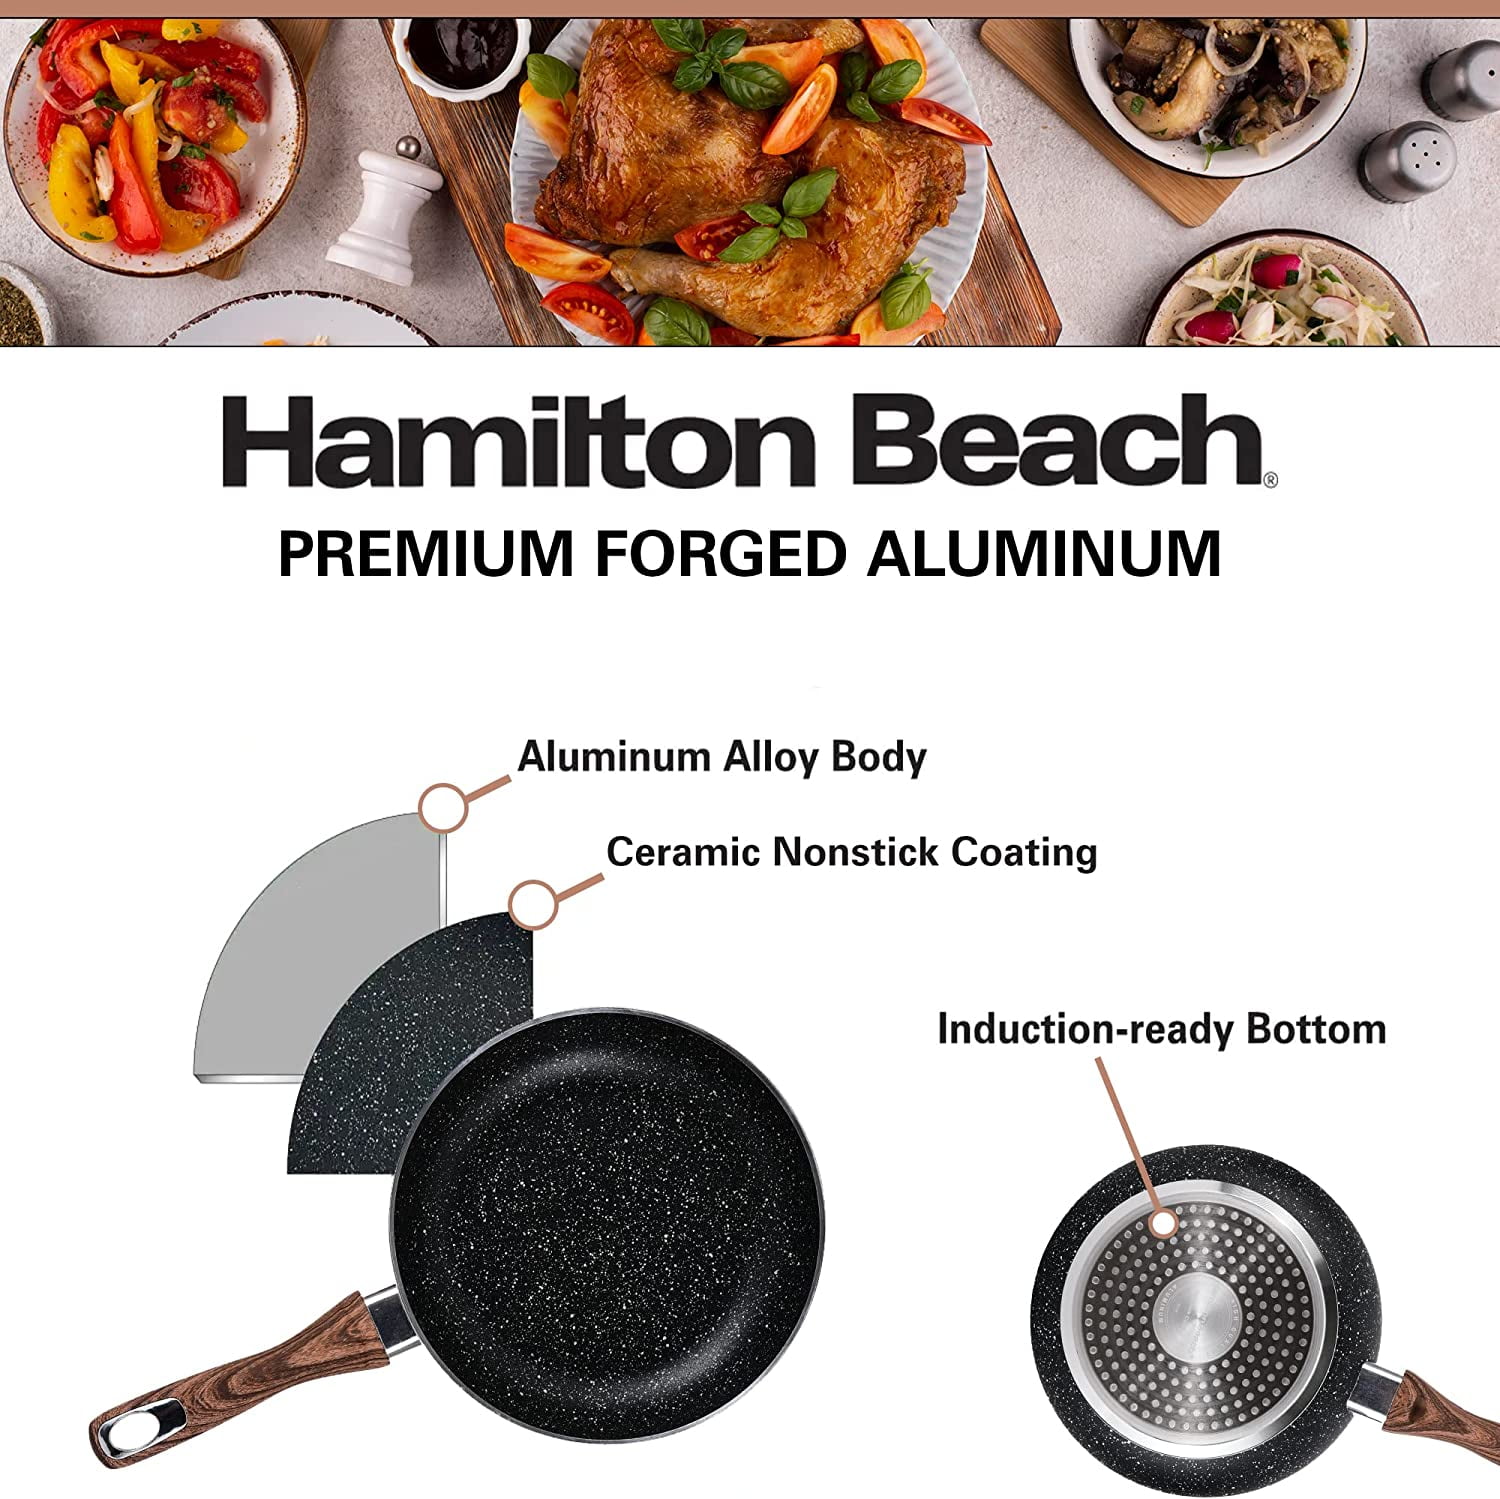 HLAFRG 12 inch Nonstick Frying Pan with Lid, Brown Marble Skillet with Stone-Derived Coating, APEO & PFOA Free, with Heat-Resistant Handle, Oven